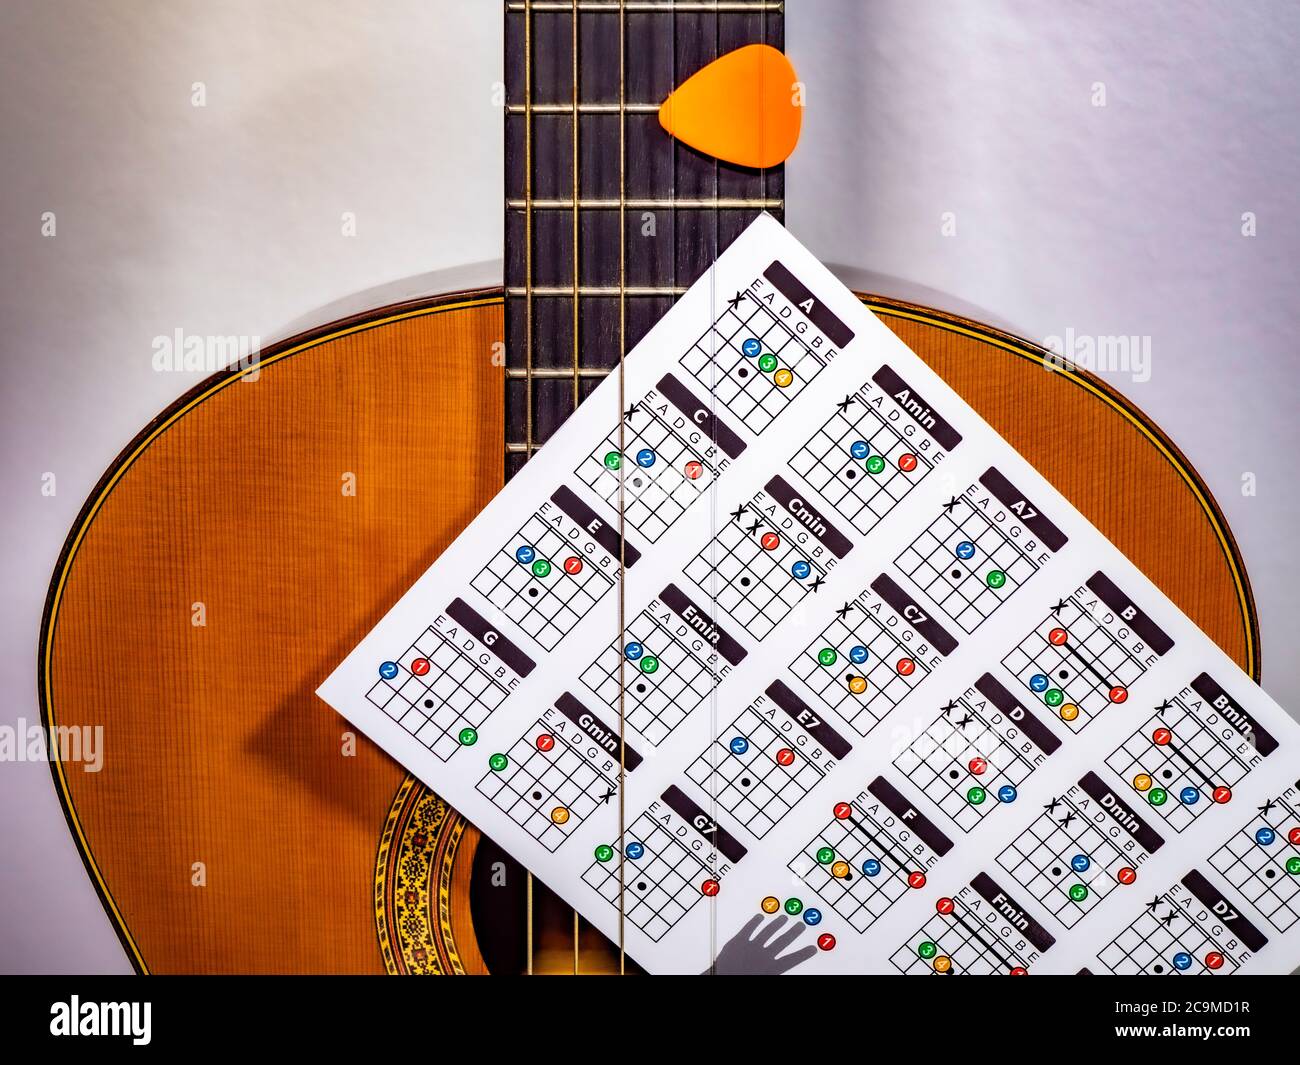 Closeup of a beginner’s chord card and plectrum held in place through the strings of a nylon strung classical guitar, after practise. Stock Photo